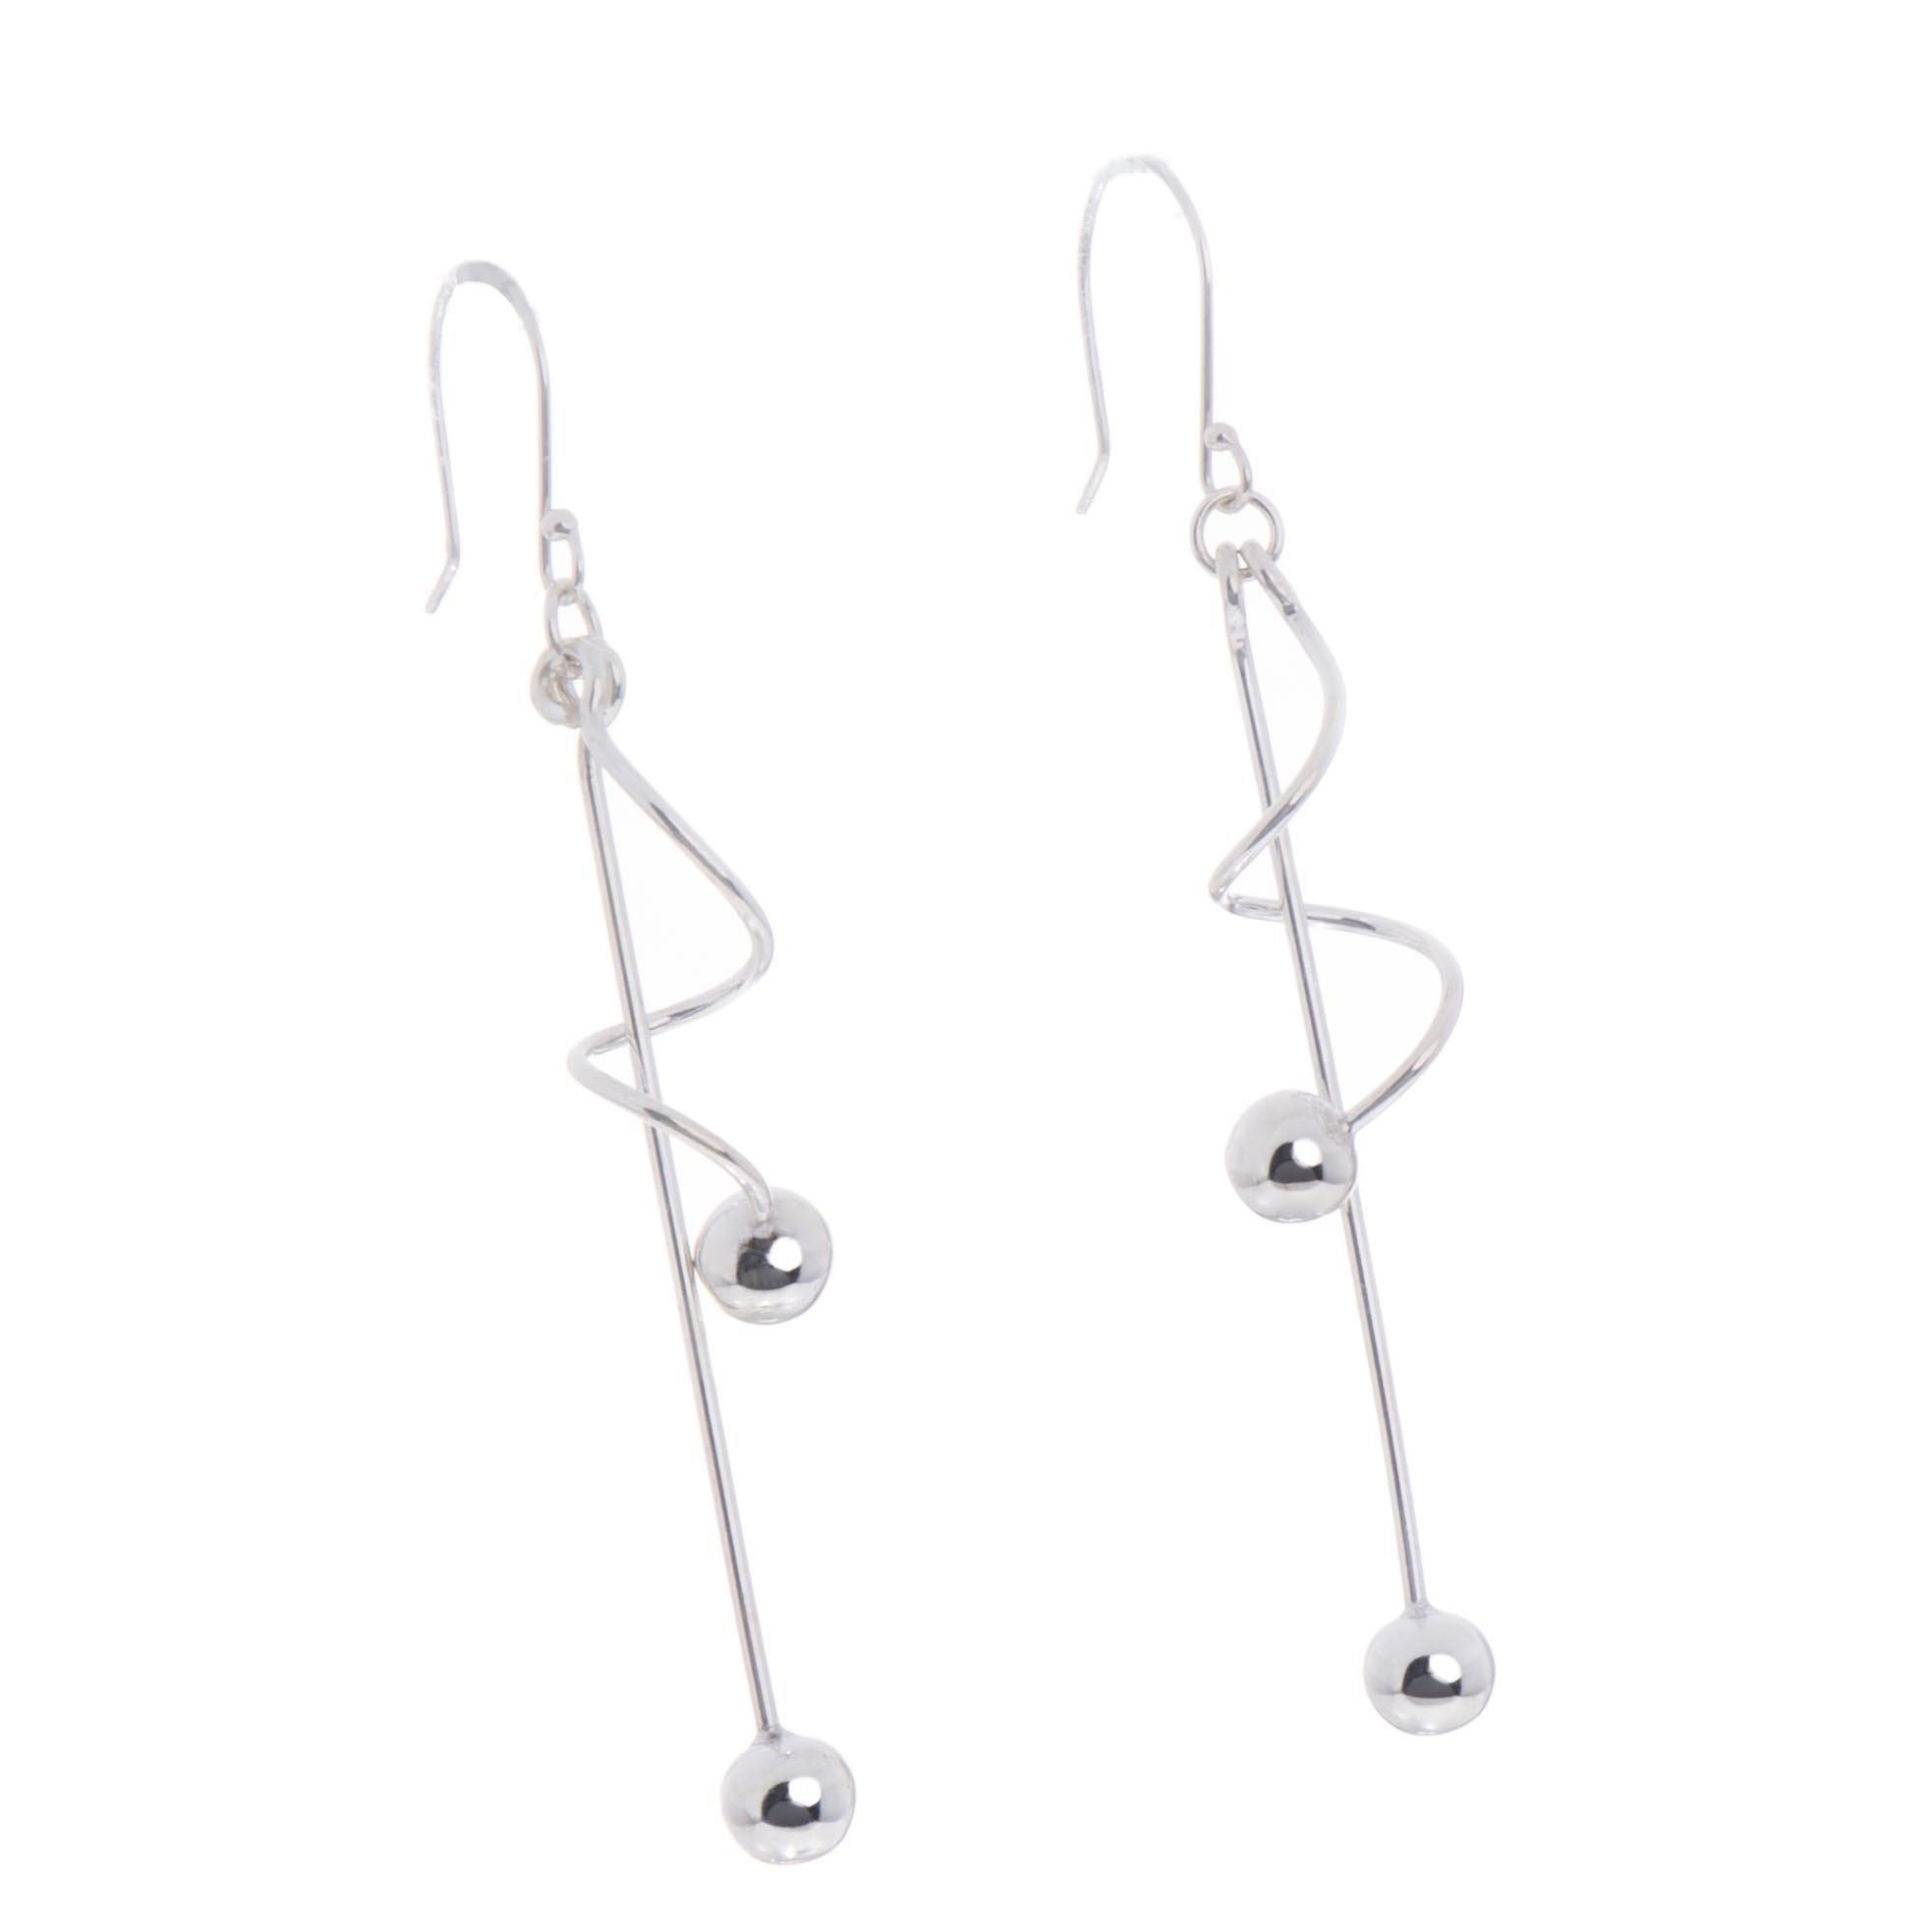 Long silver earrings with spiral and spheres